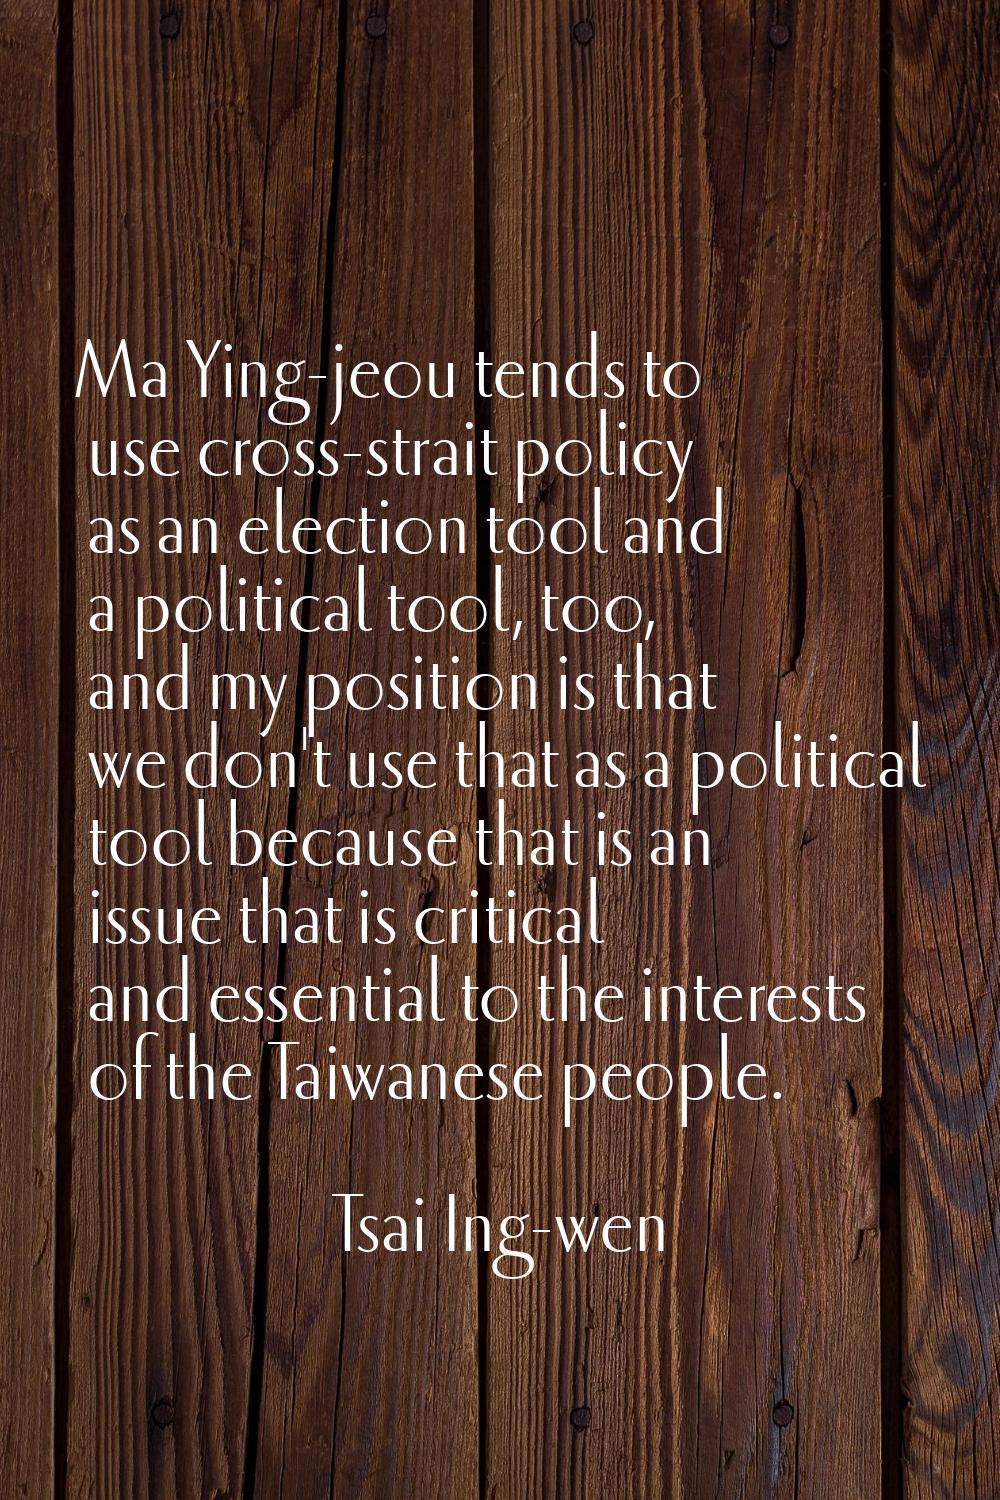 Ma Ying-jeou tends to use cross-strait policy as an election tool and a political tool, too, and my